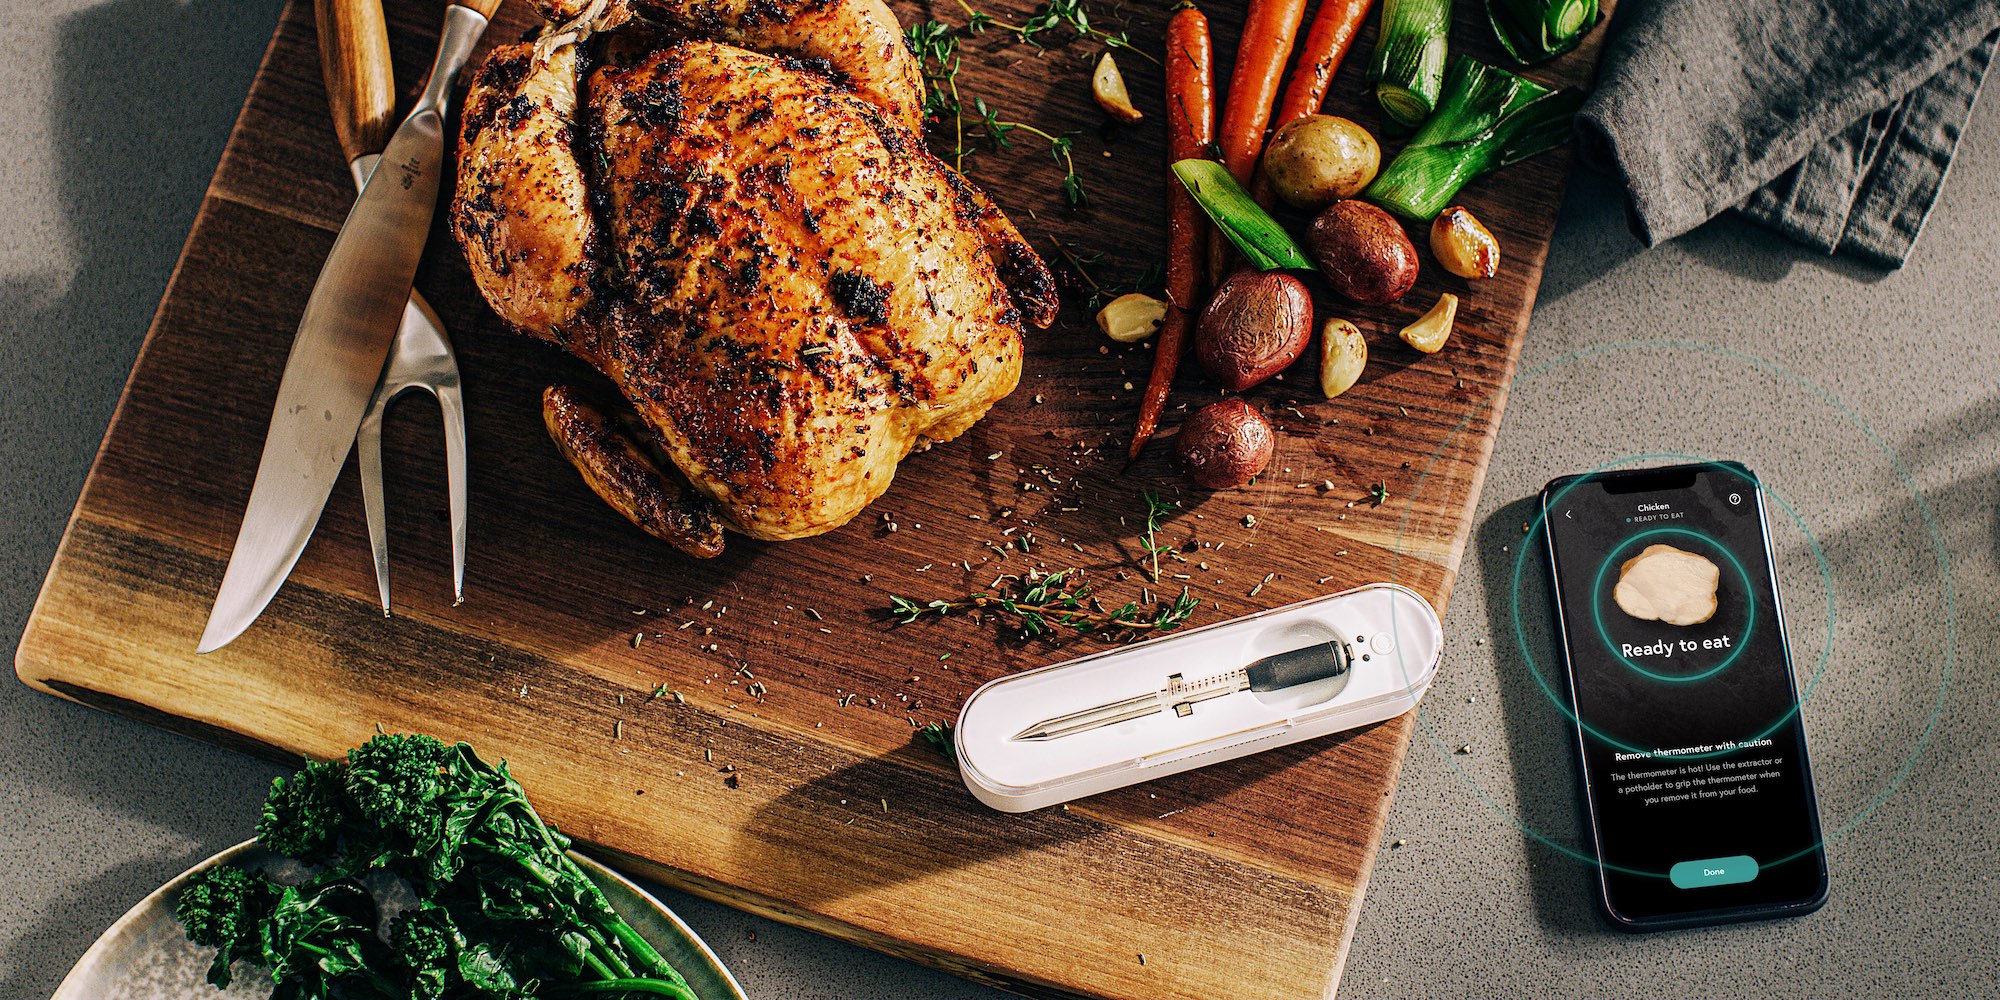 Cuisinart Wireless Meat Thermometer